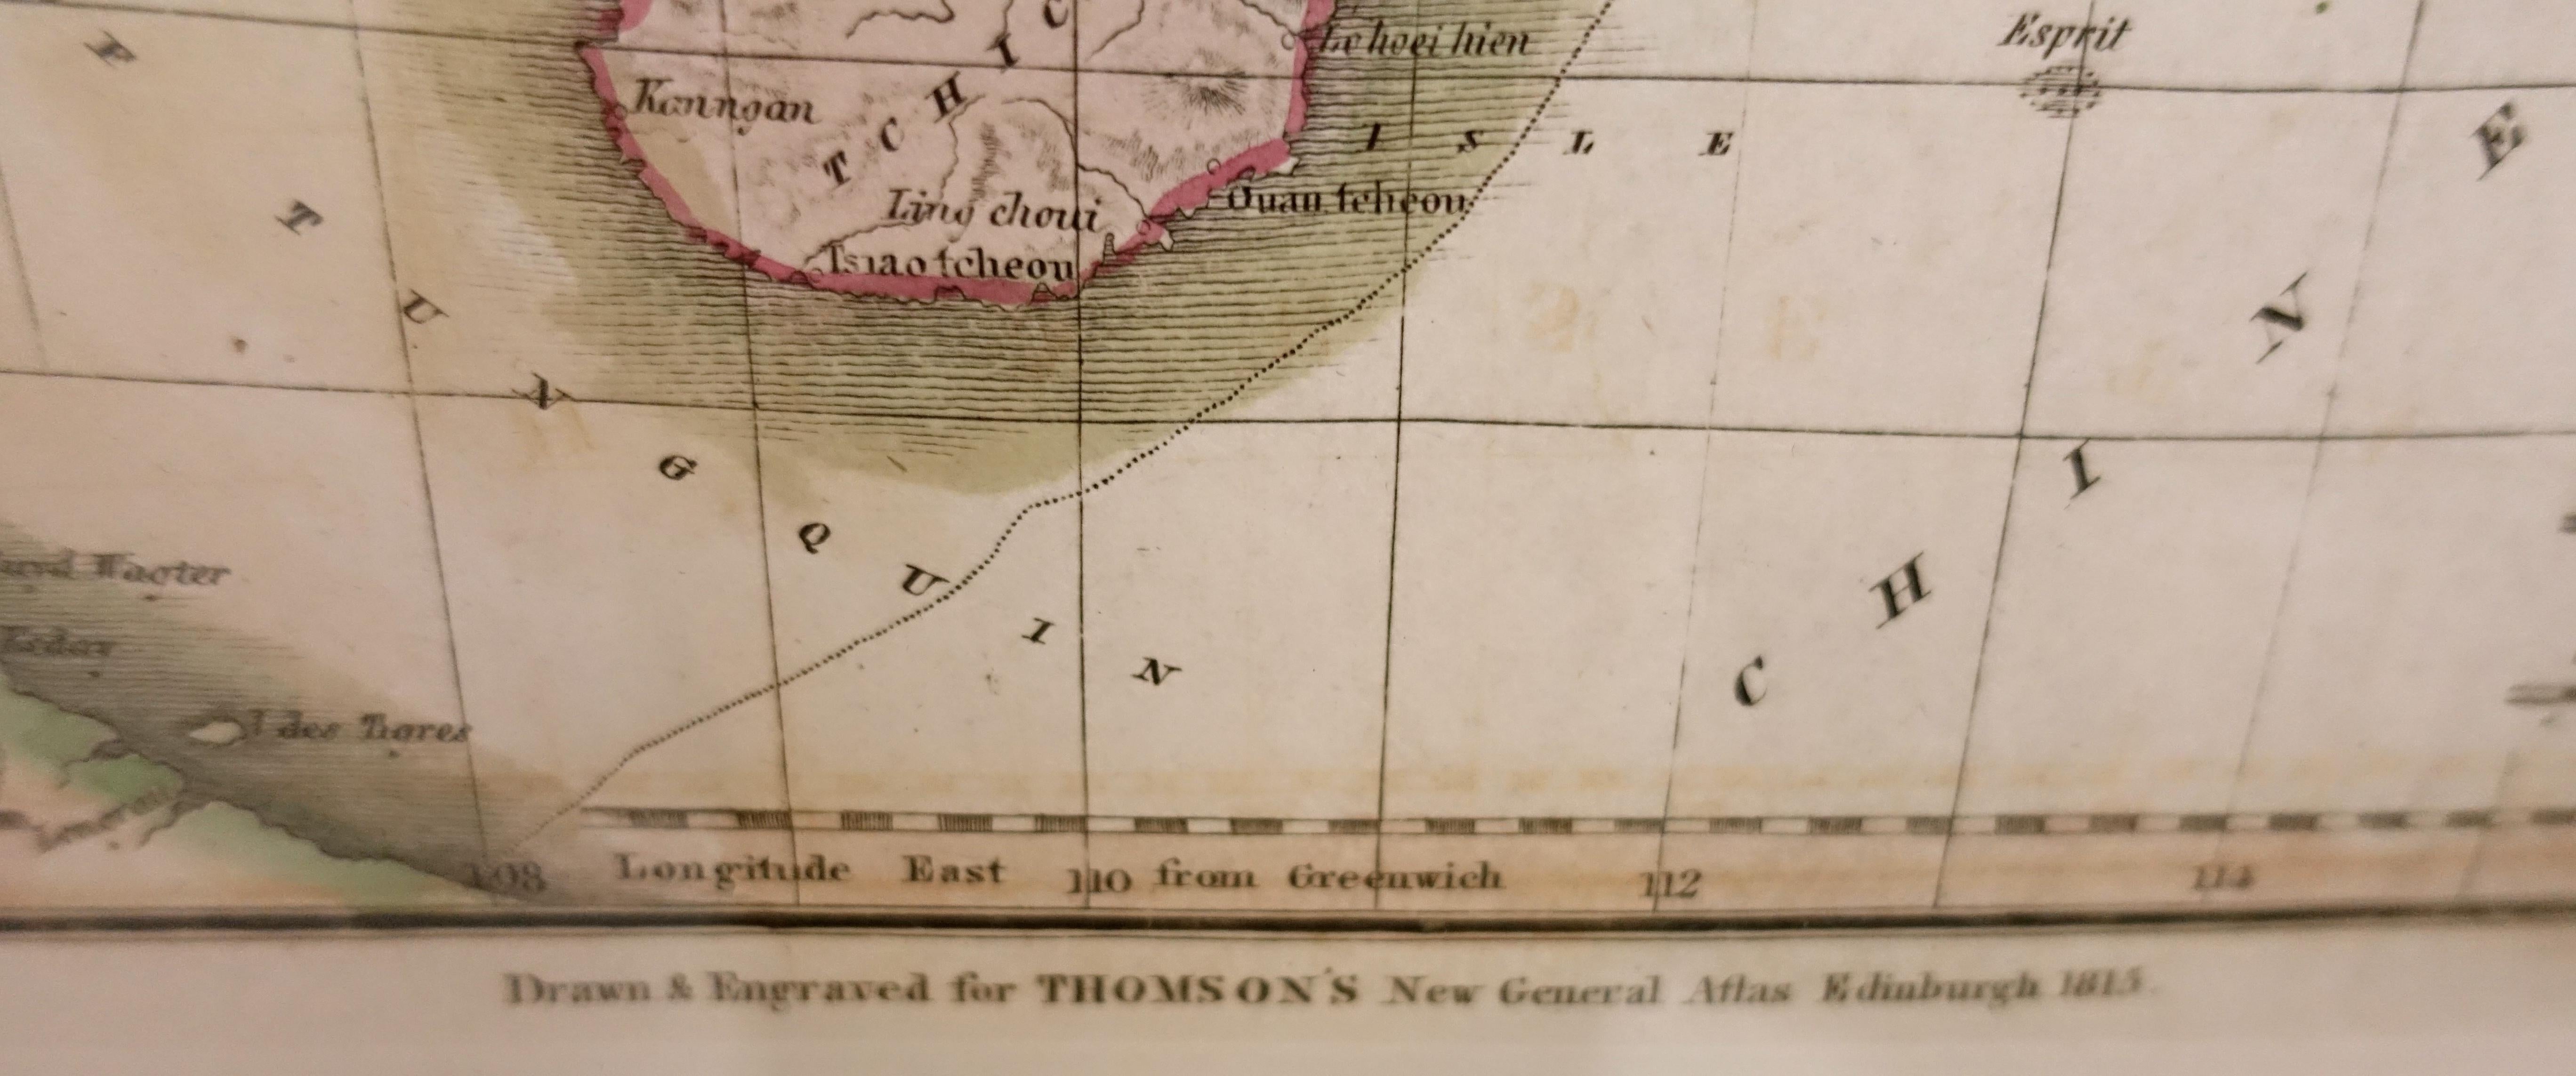 Hand drawn and tinted engraved map of China dated 1815 
Created for Thomson's New General Atlas
Edinburgh
Beautifully framed with a linen covered mat.